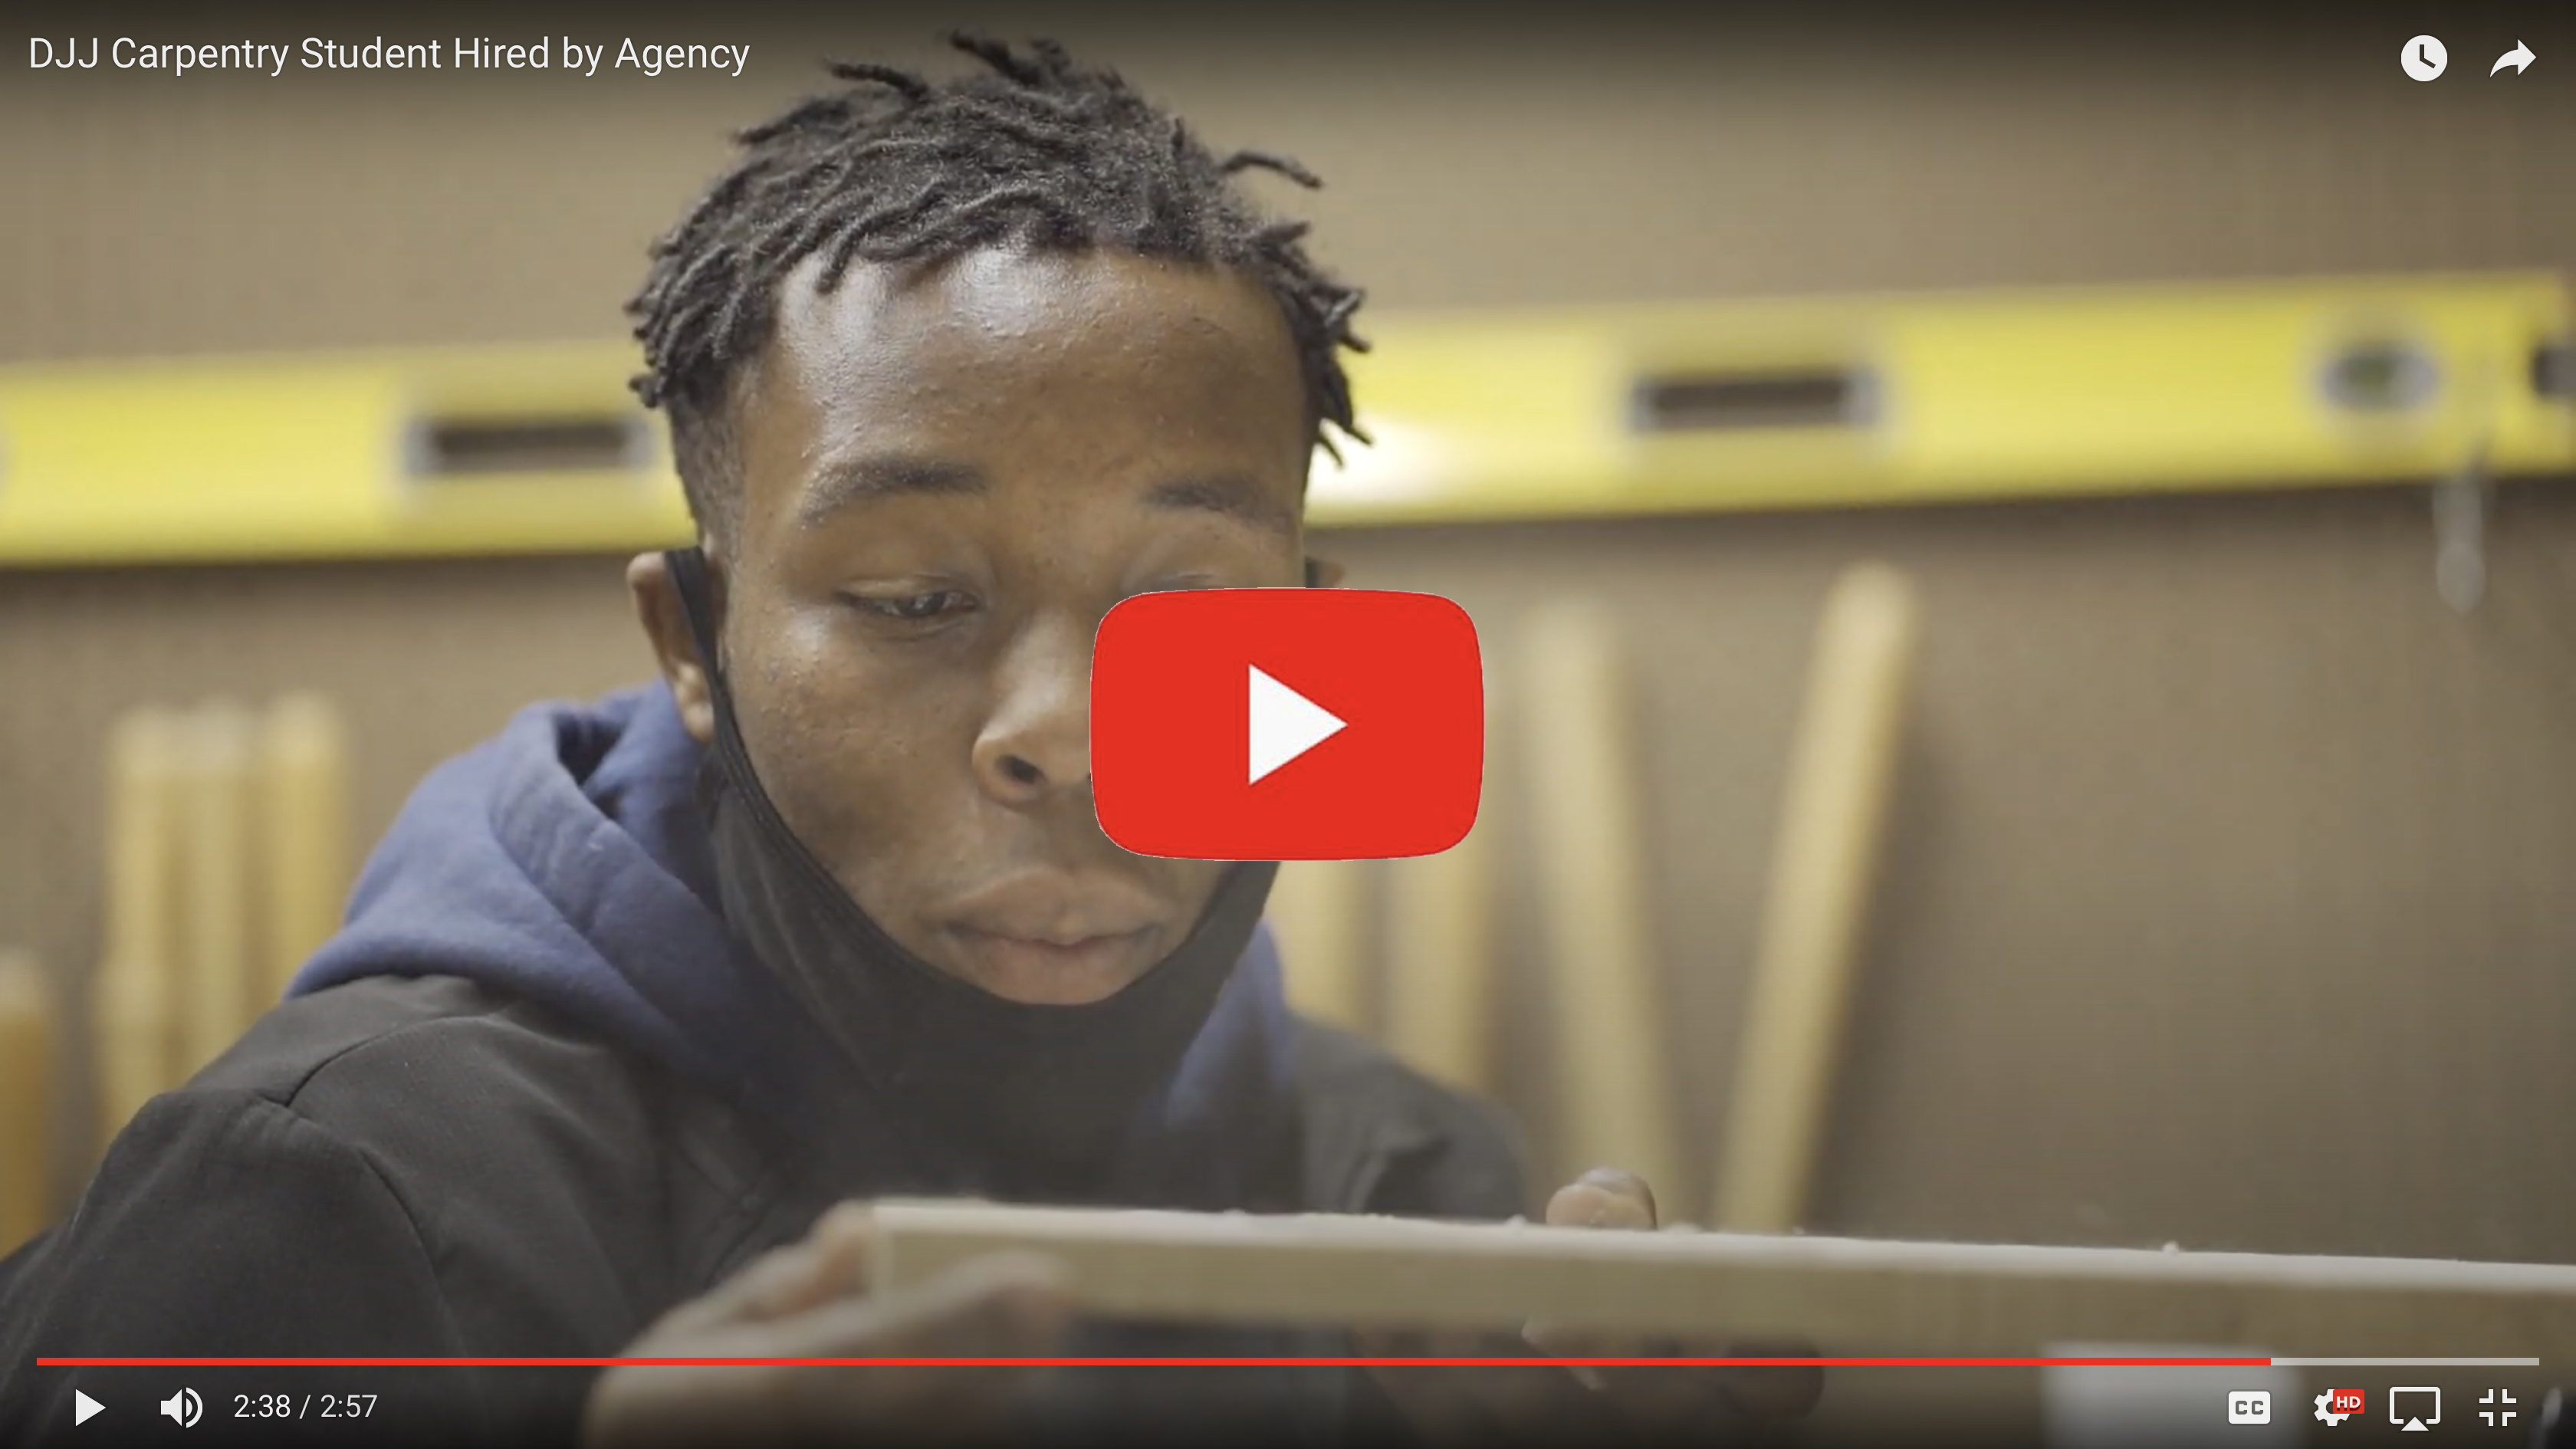 Video of DJJ Carpentry Student Hired by Agency to work at The Store of Hope